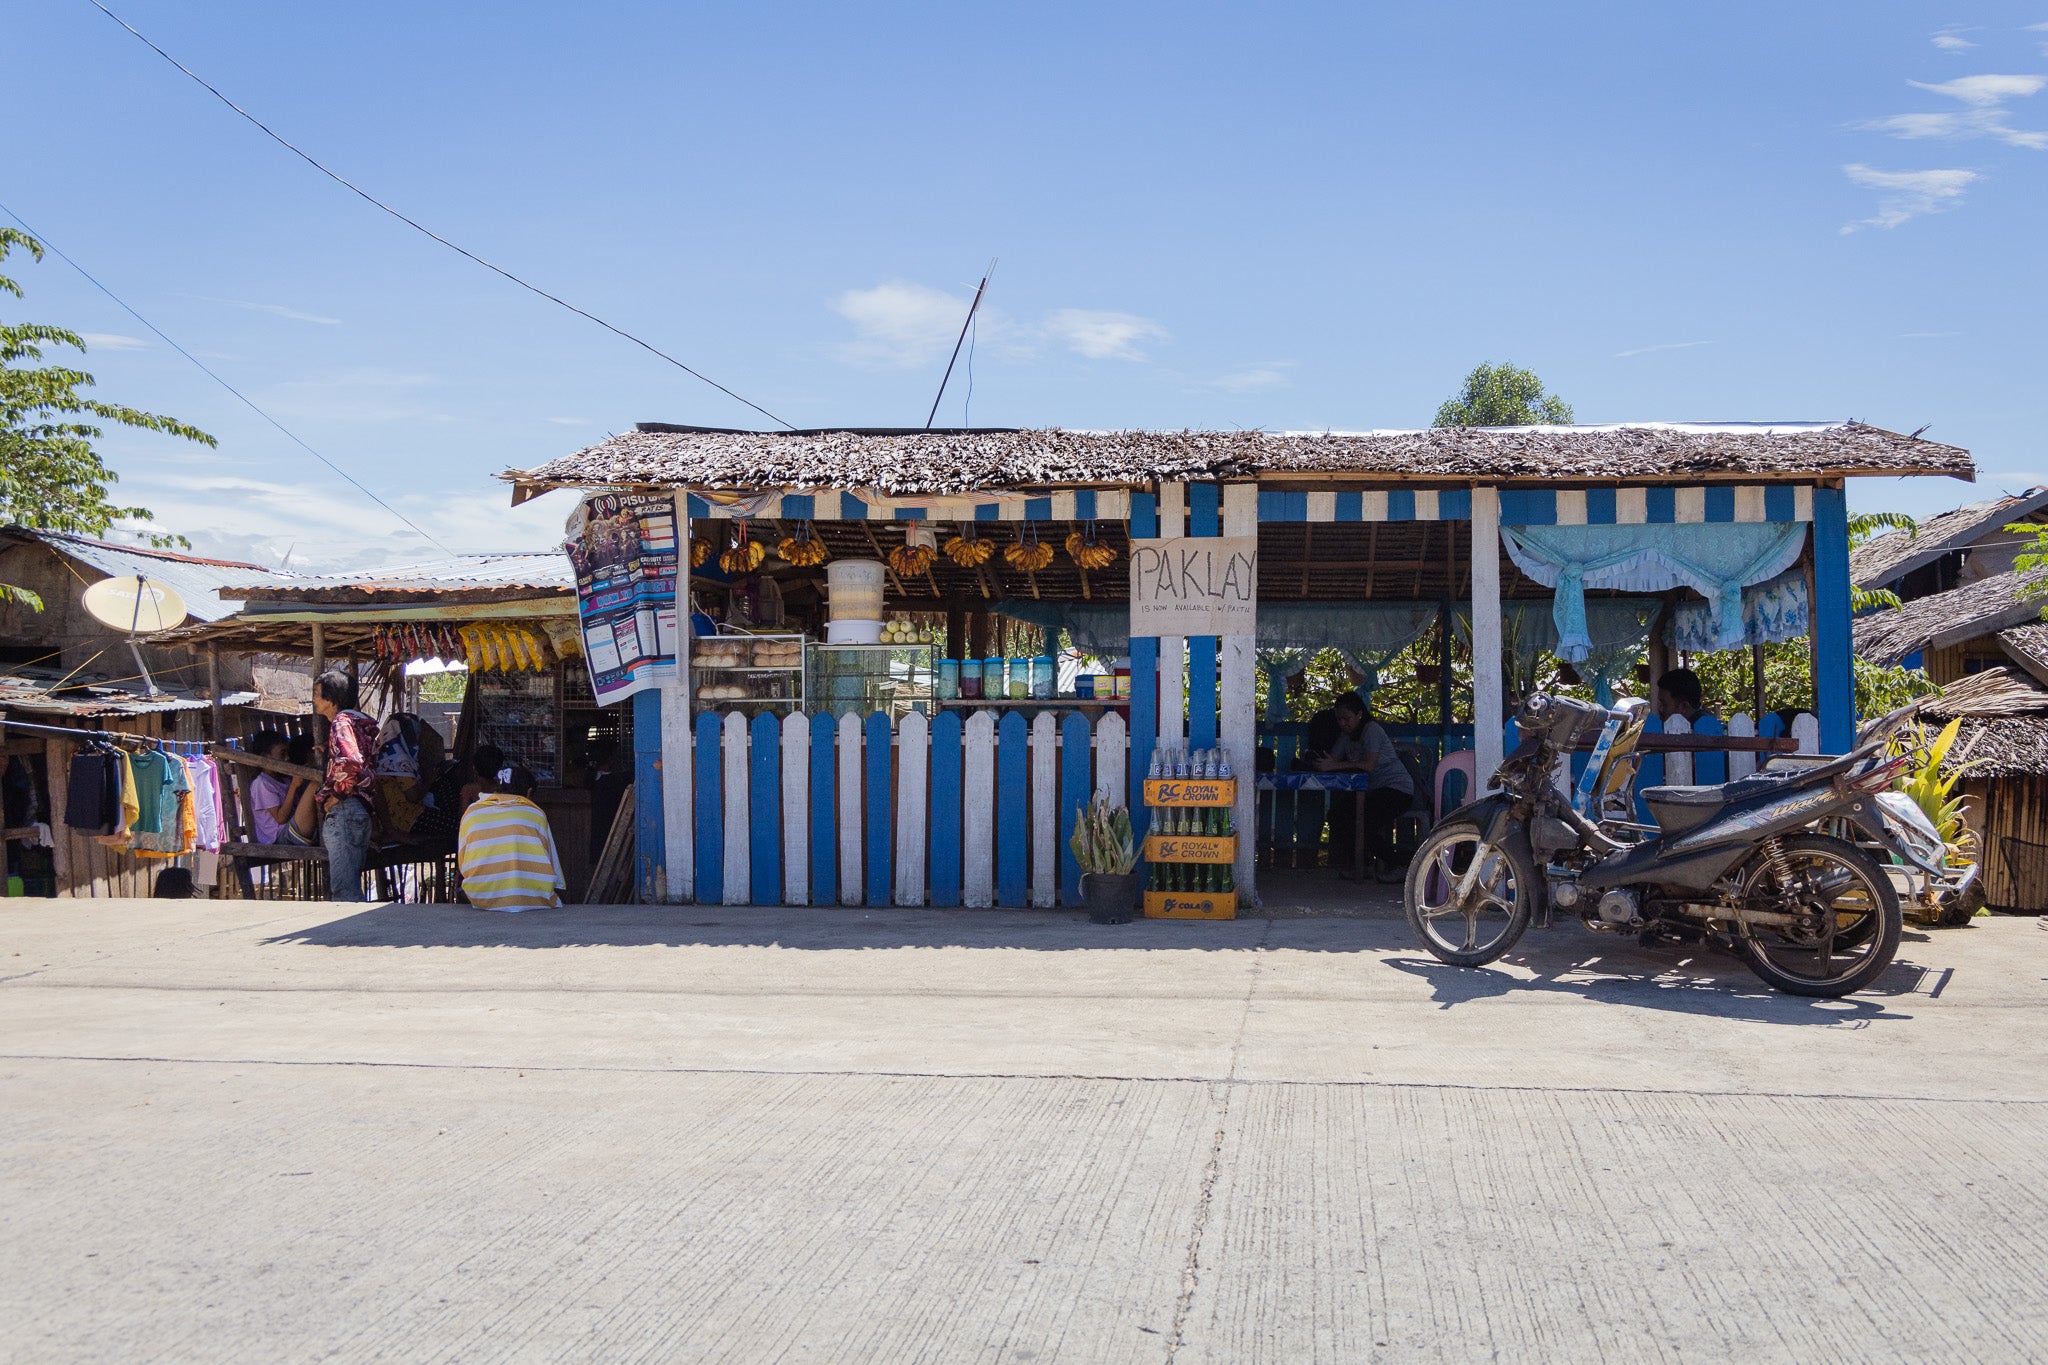 An outdoor front view of a blue and white painted shop in the Philippines.